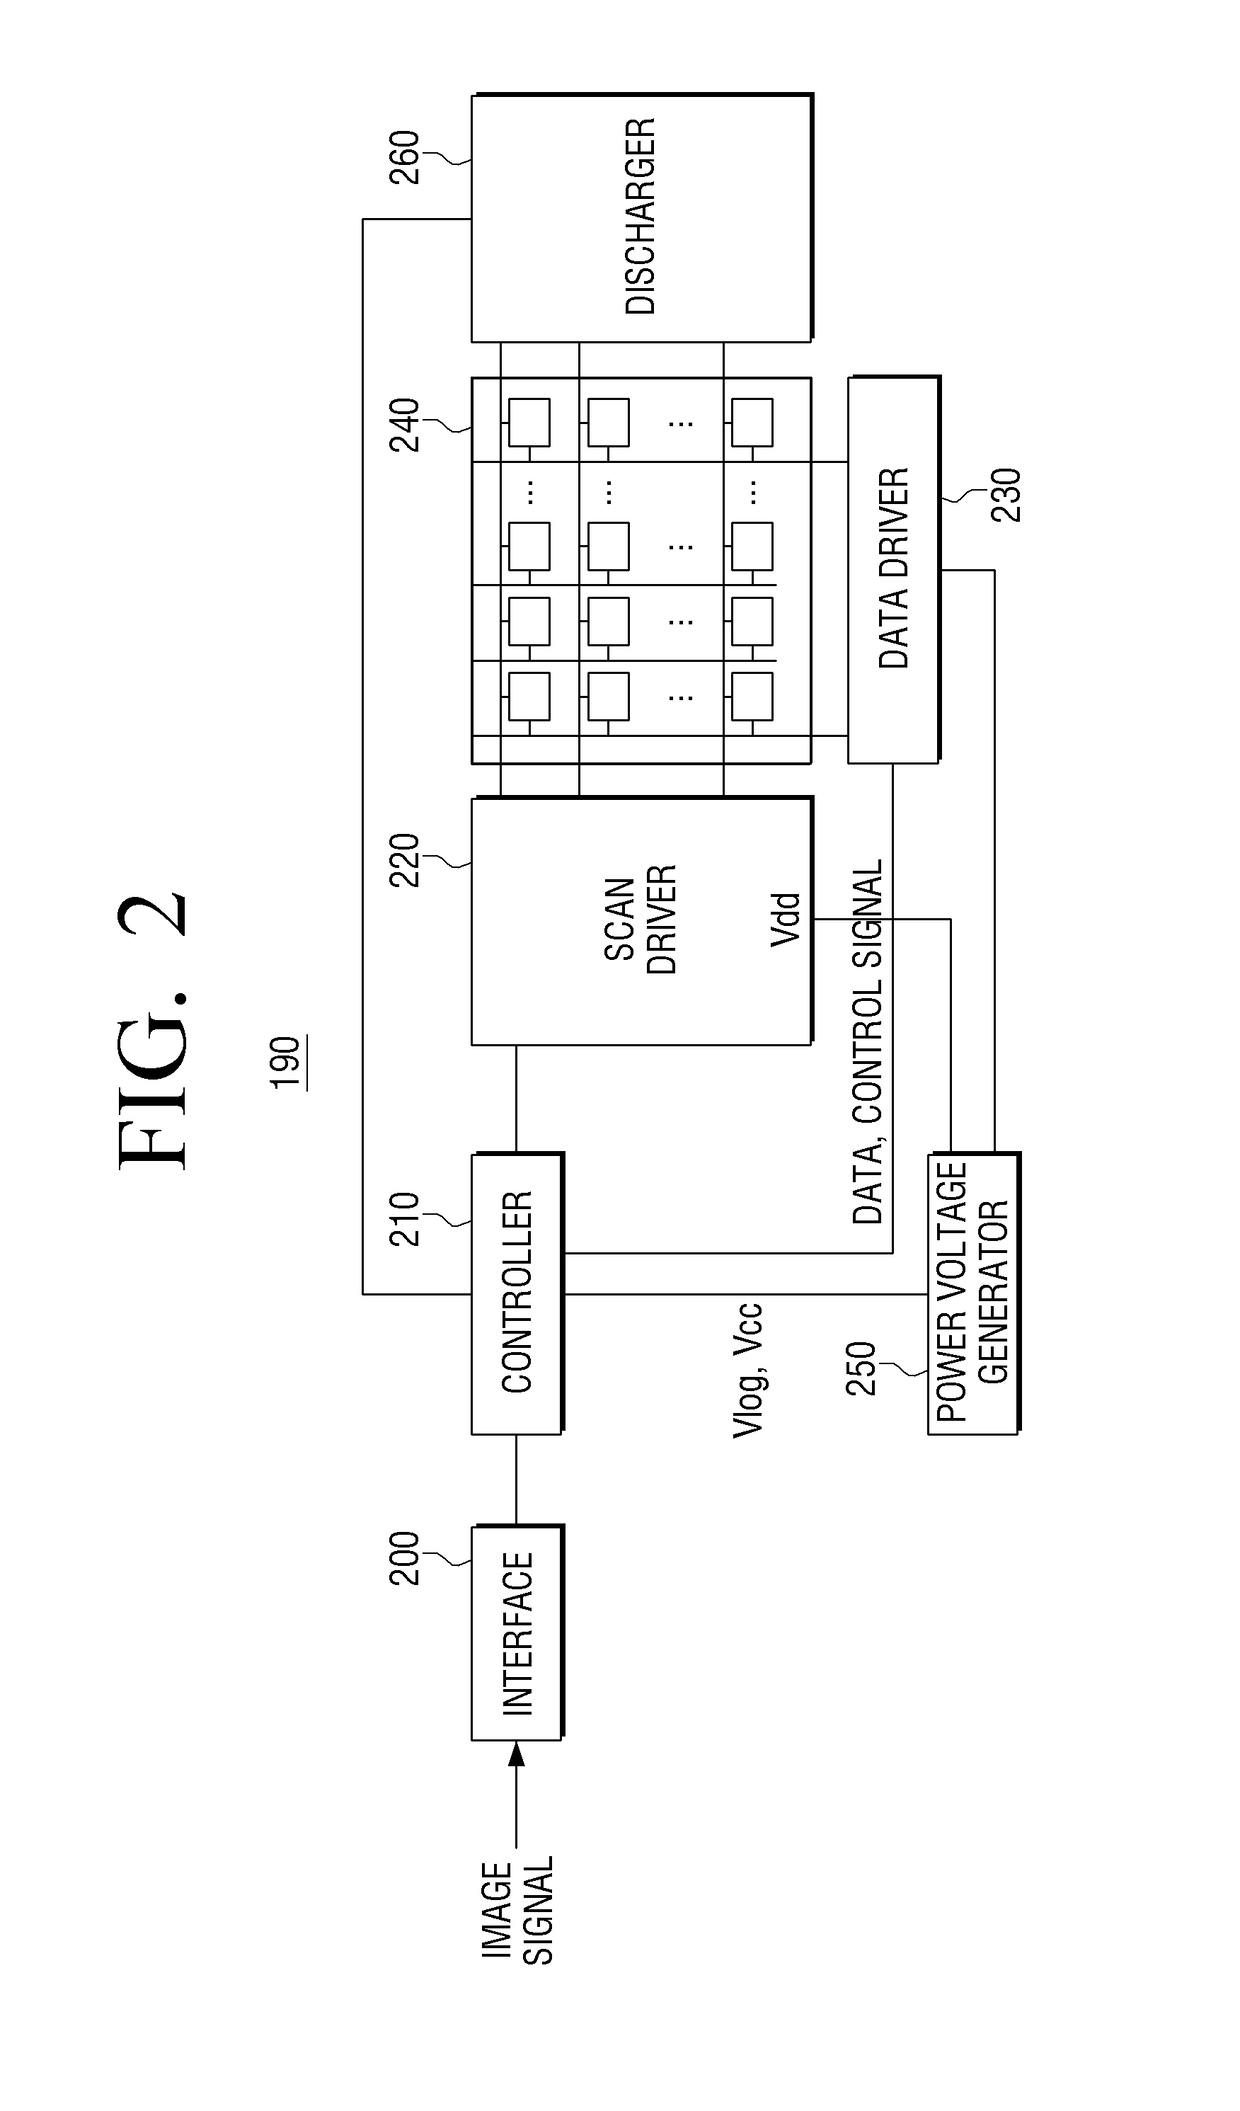 Image display apparatus and method for driving the same